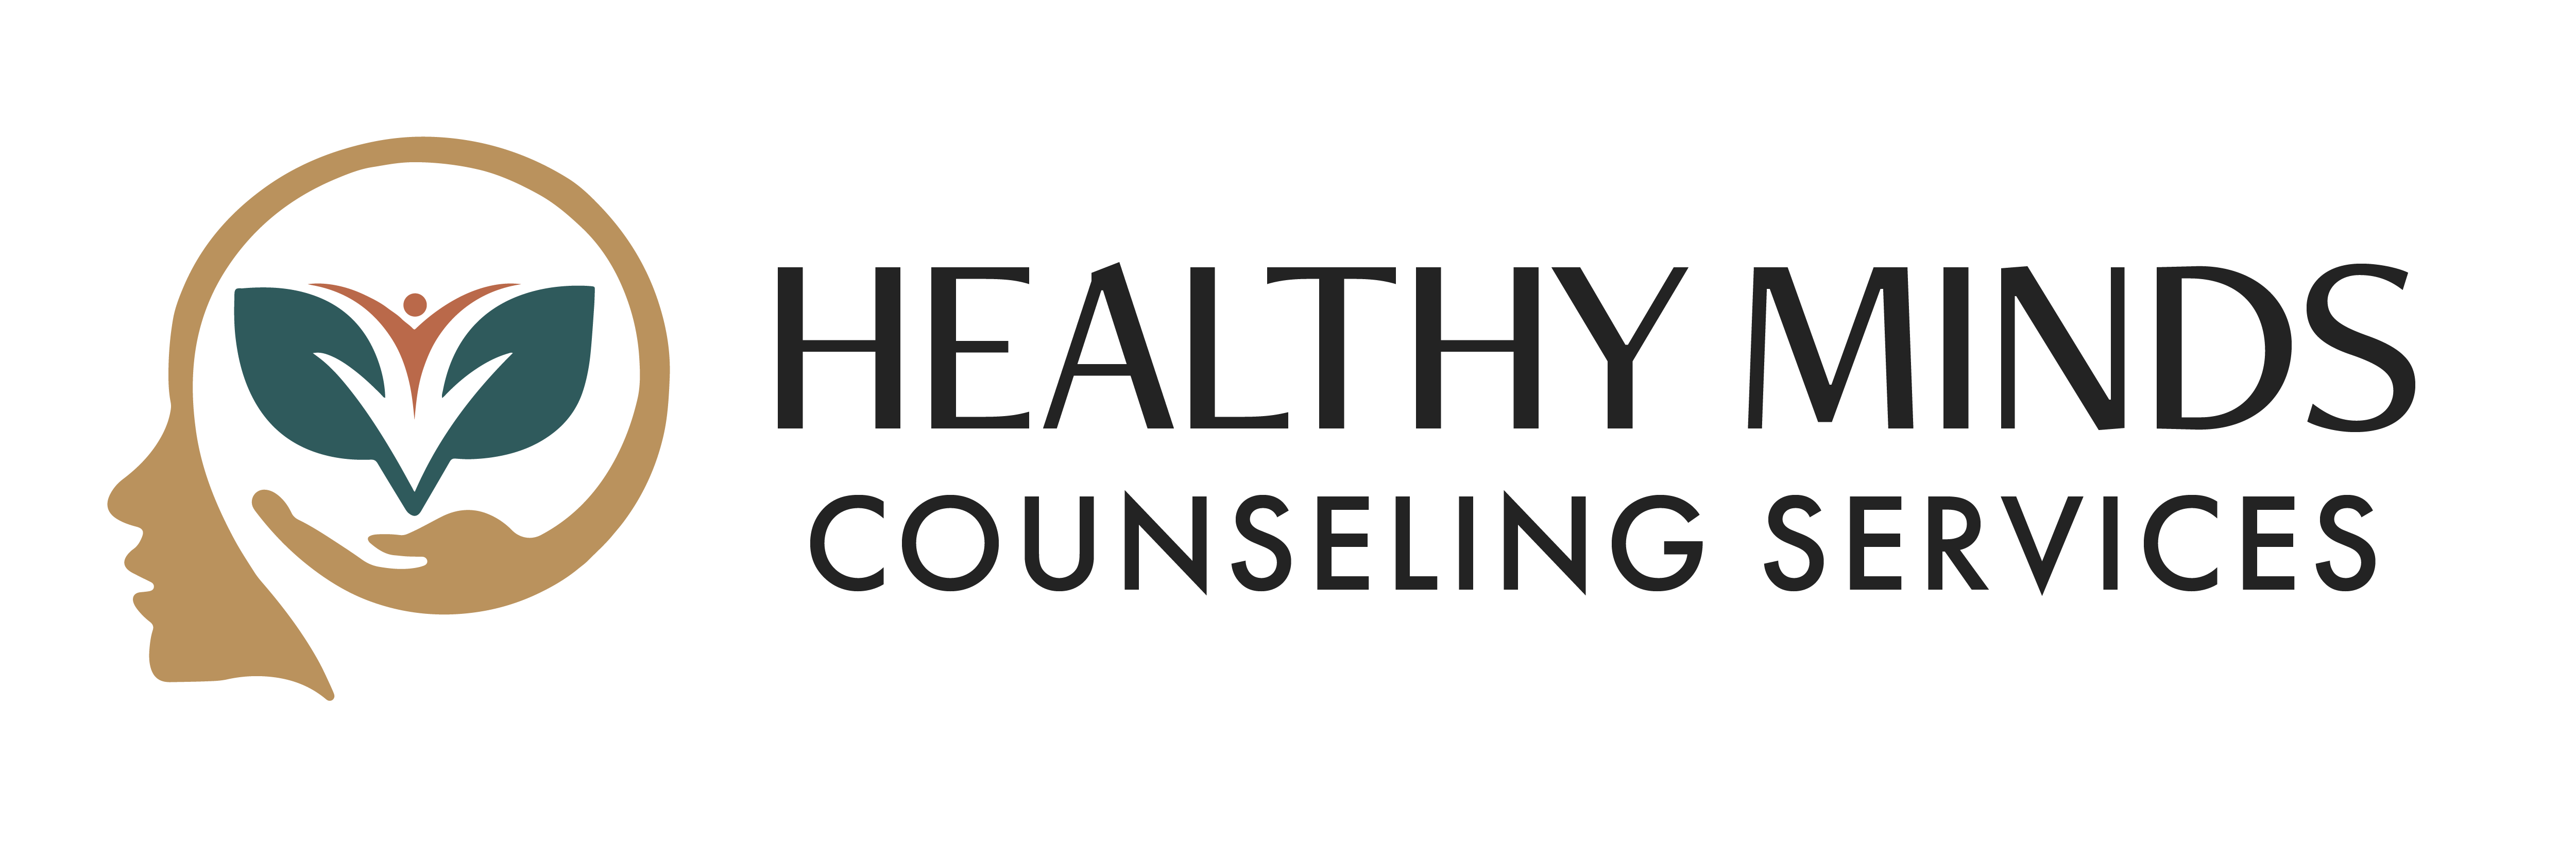 Healthy Minds Counseling Services